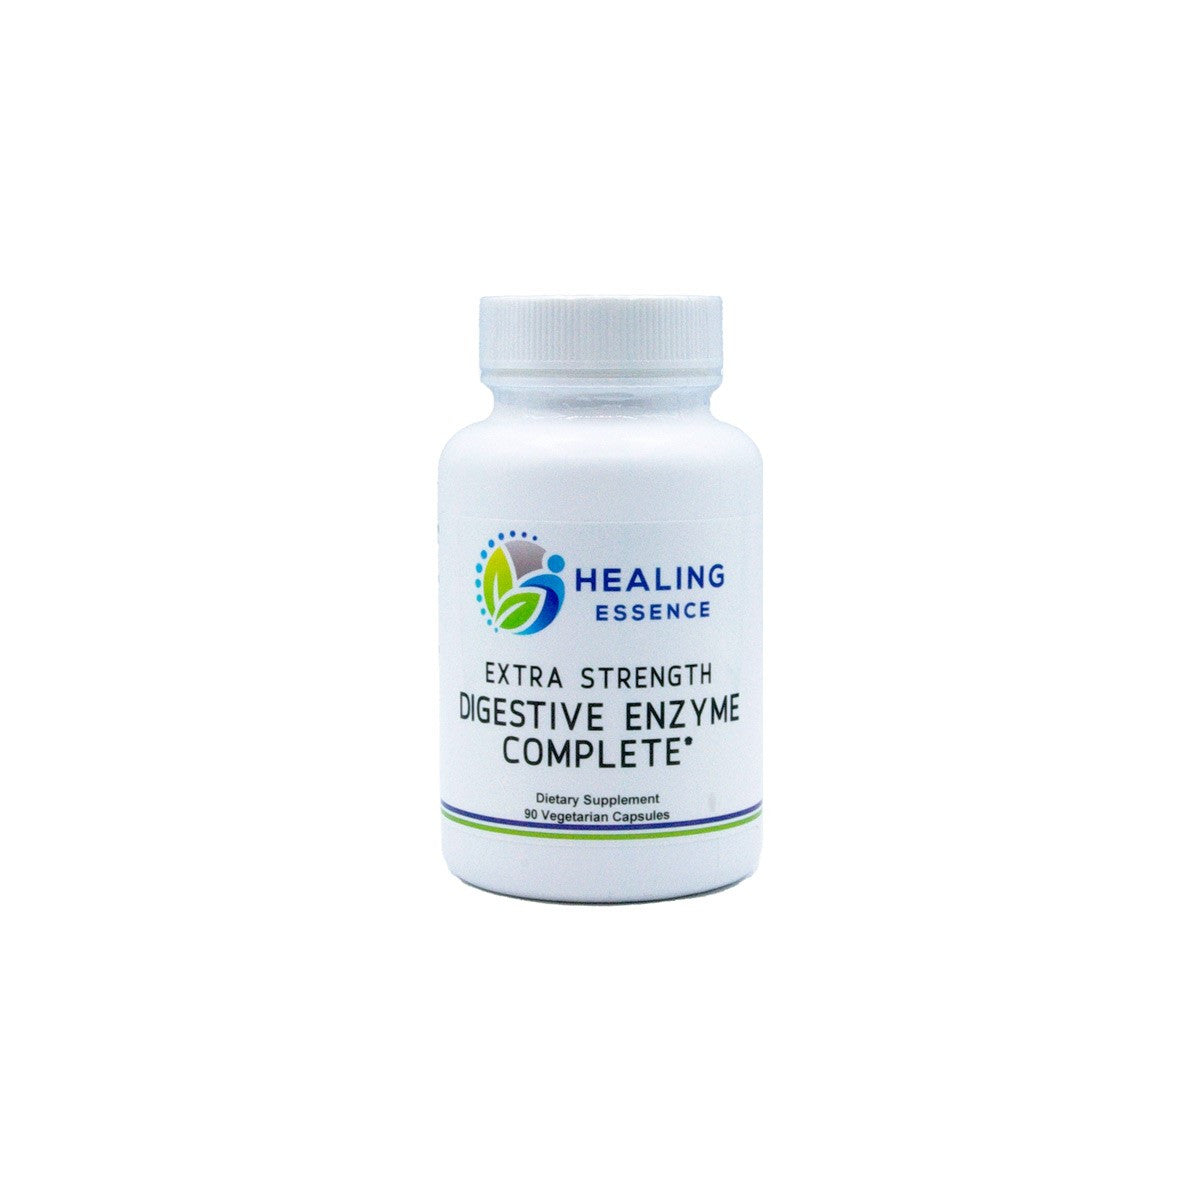 Extra Strength Digestive Enzyme Complete